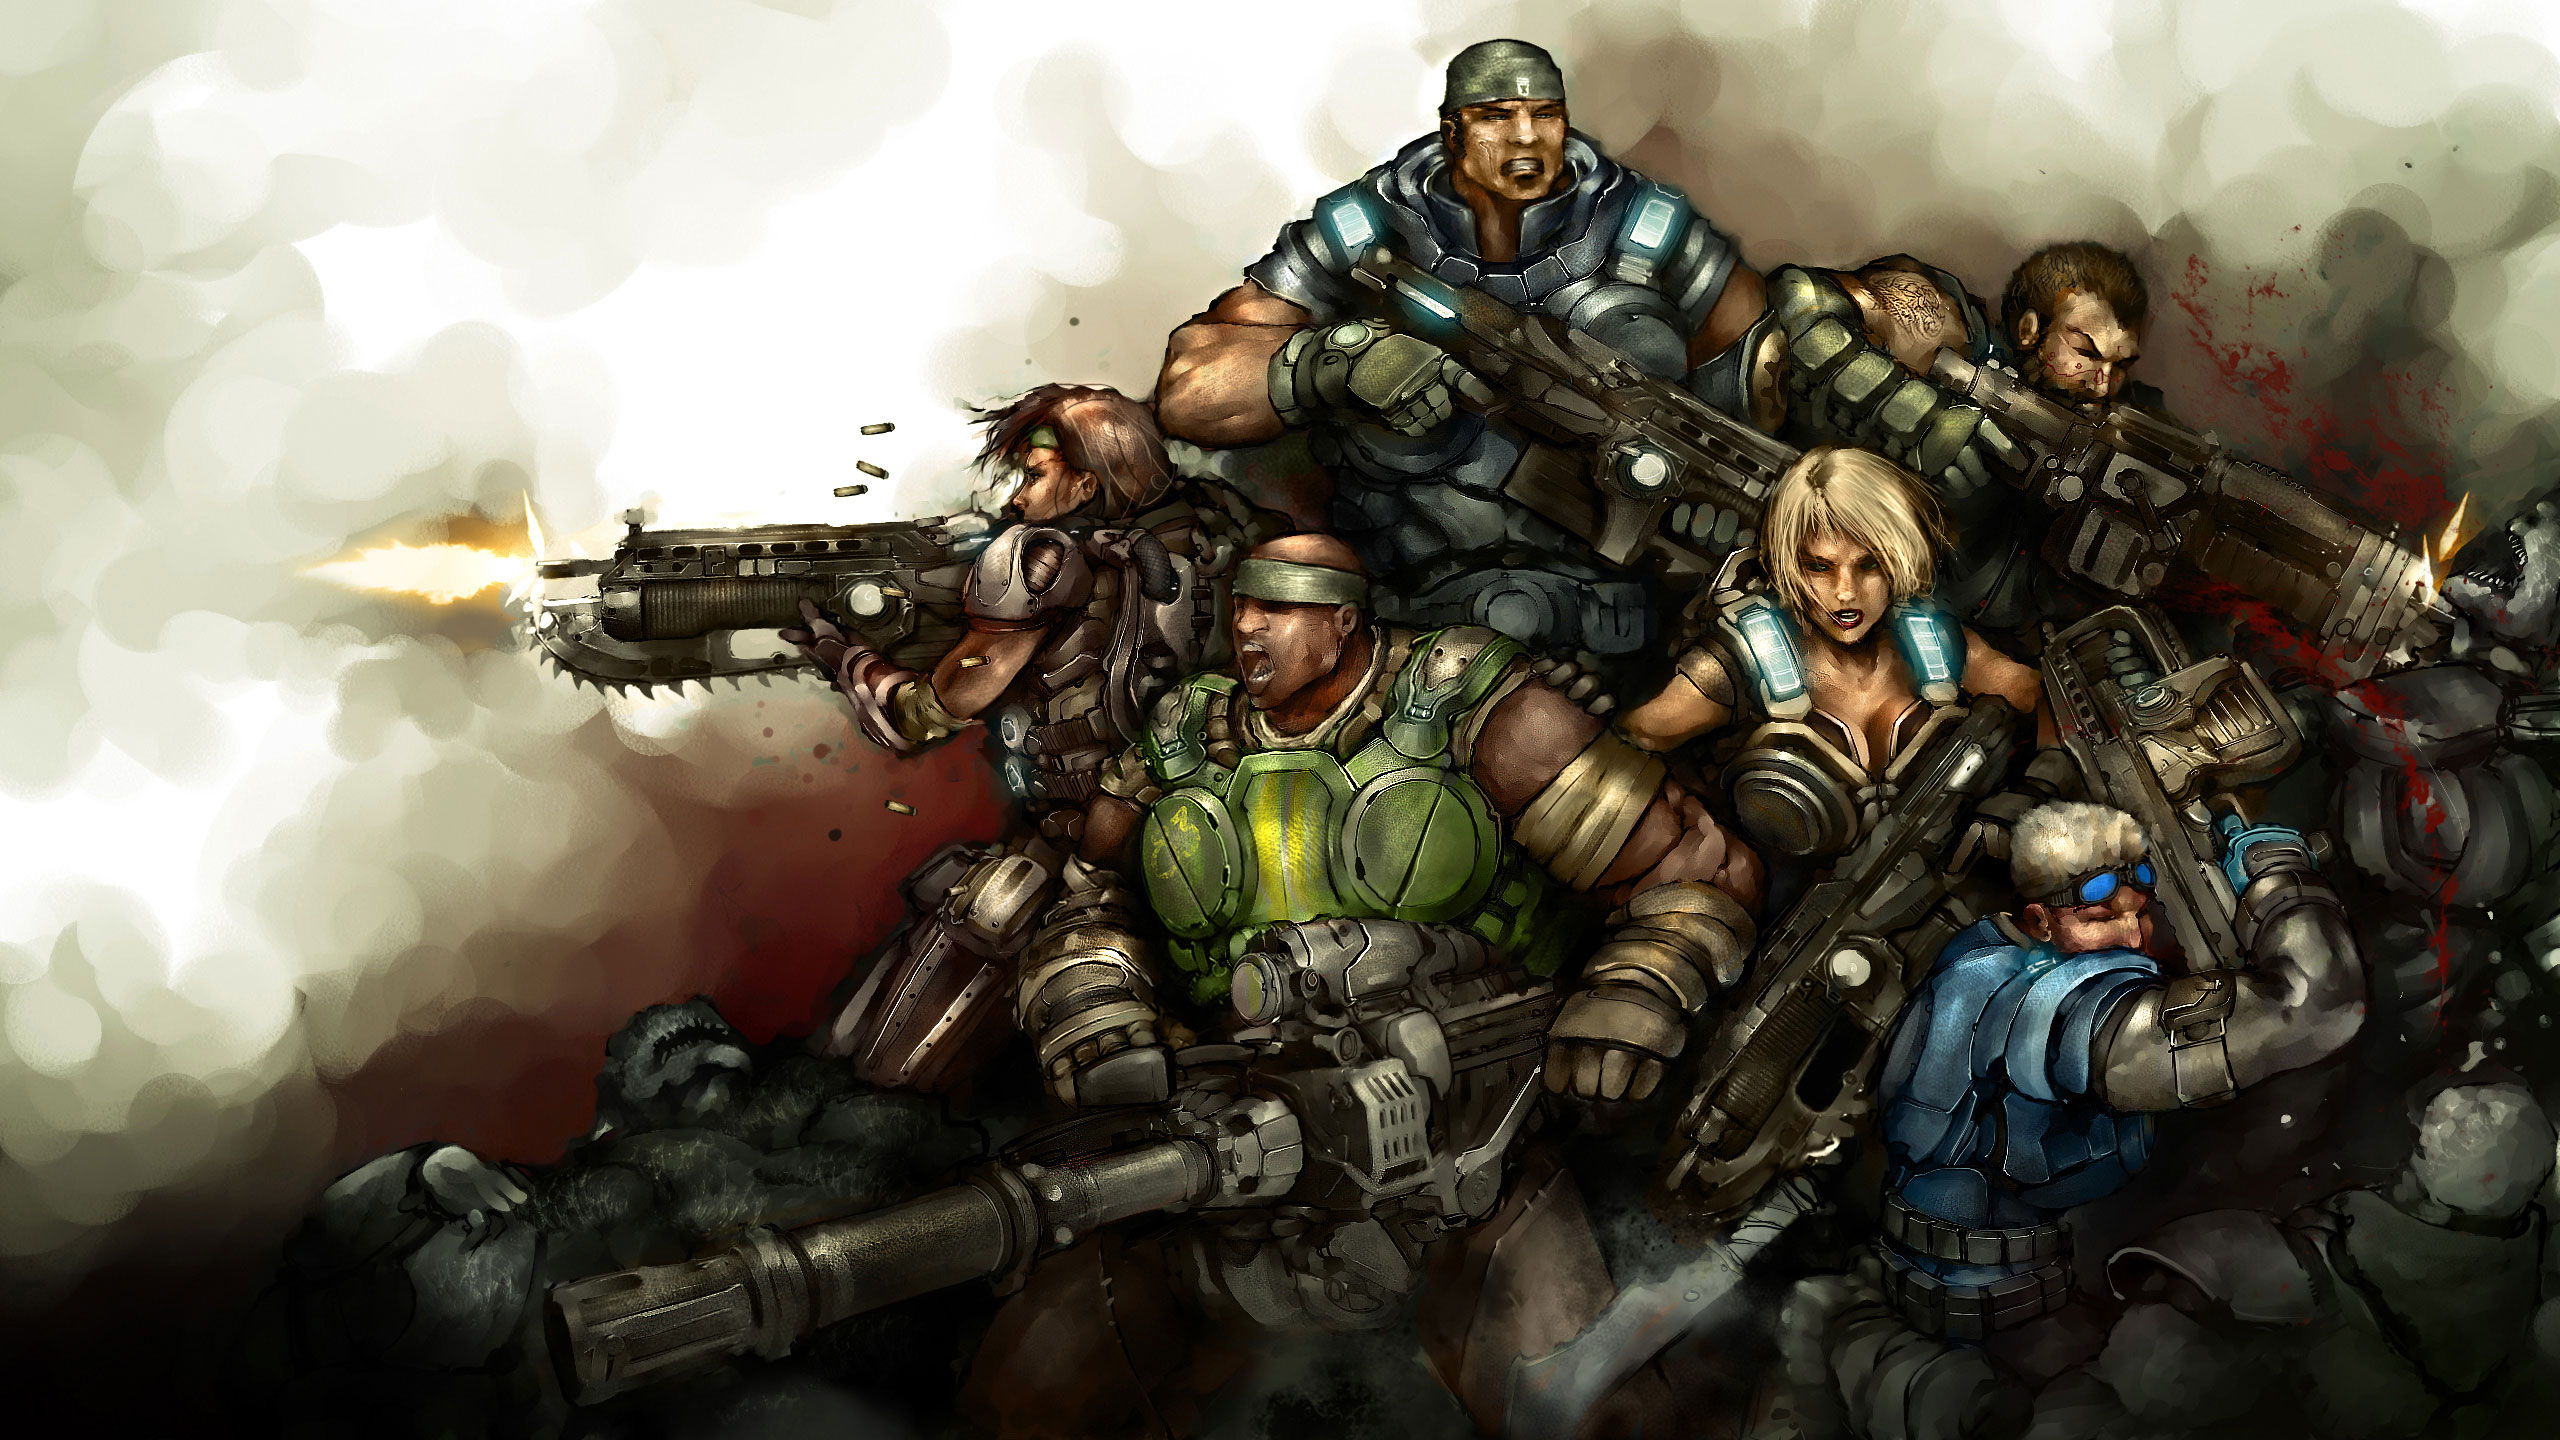 Not Copyrighted: GEARS OF WAR 3 SCREENSAVER